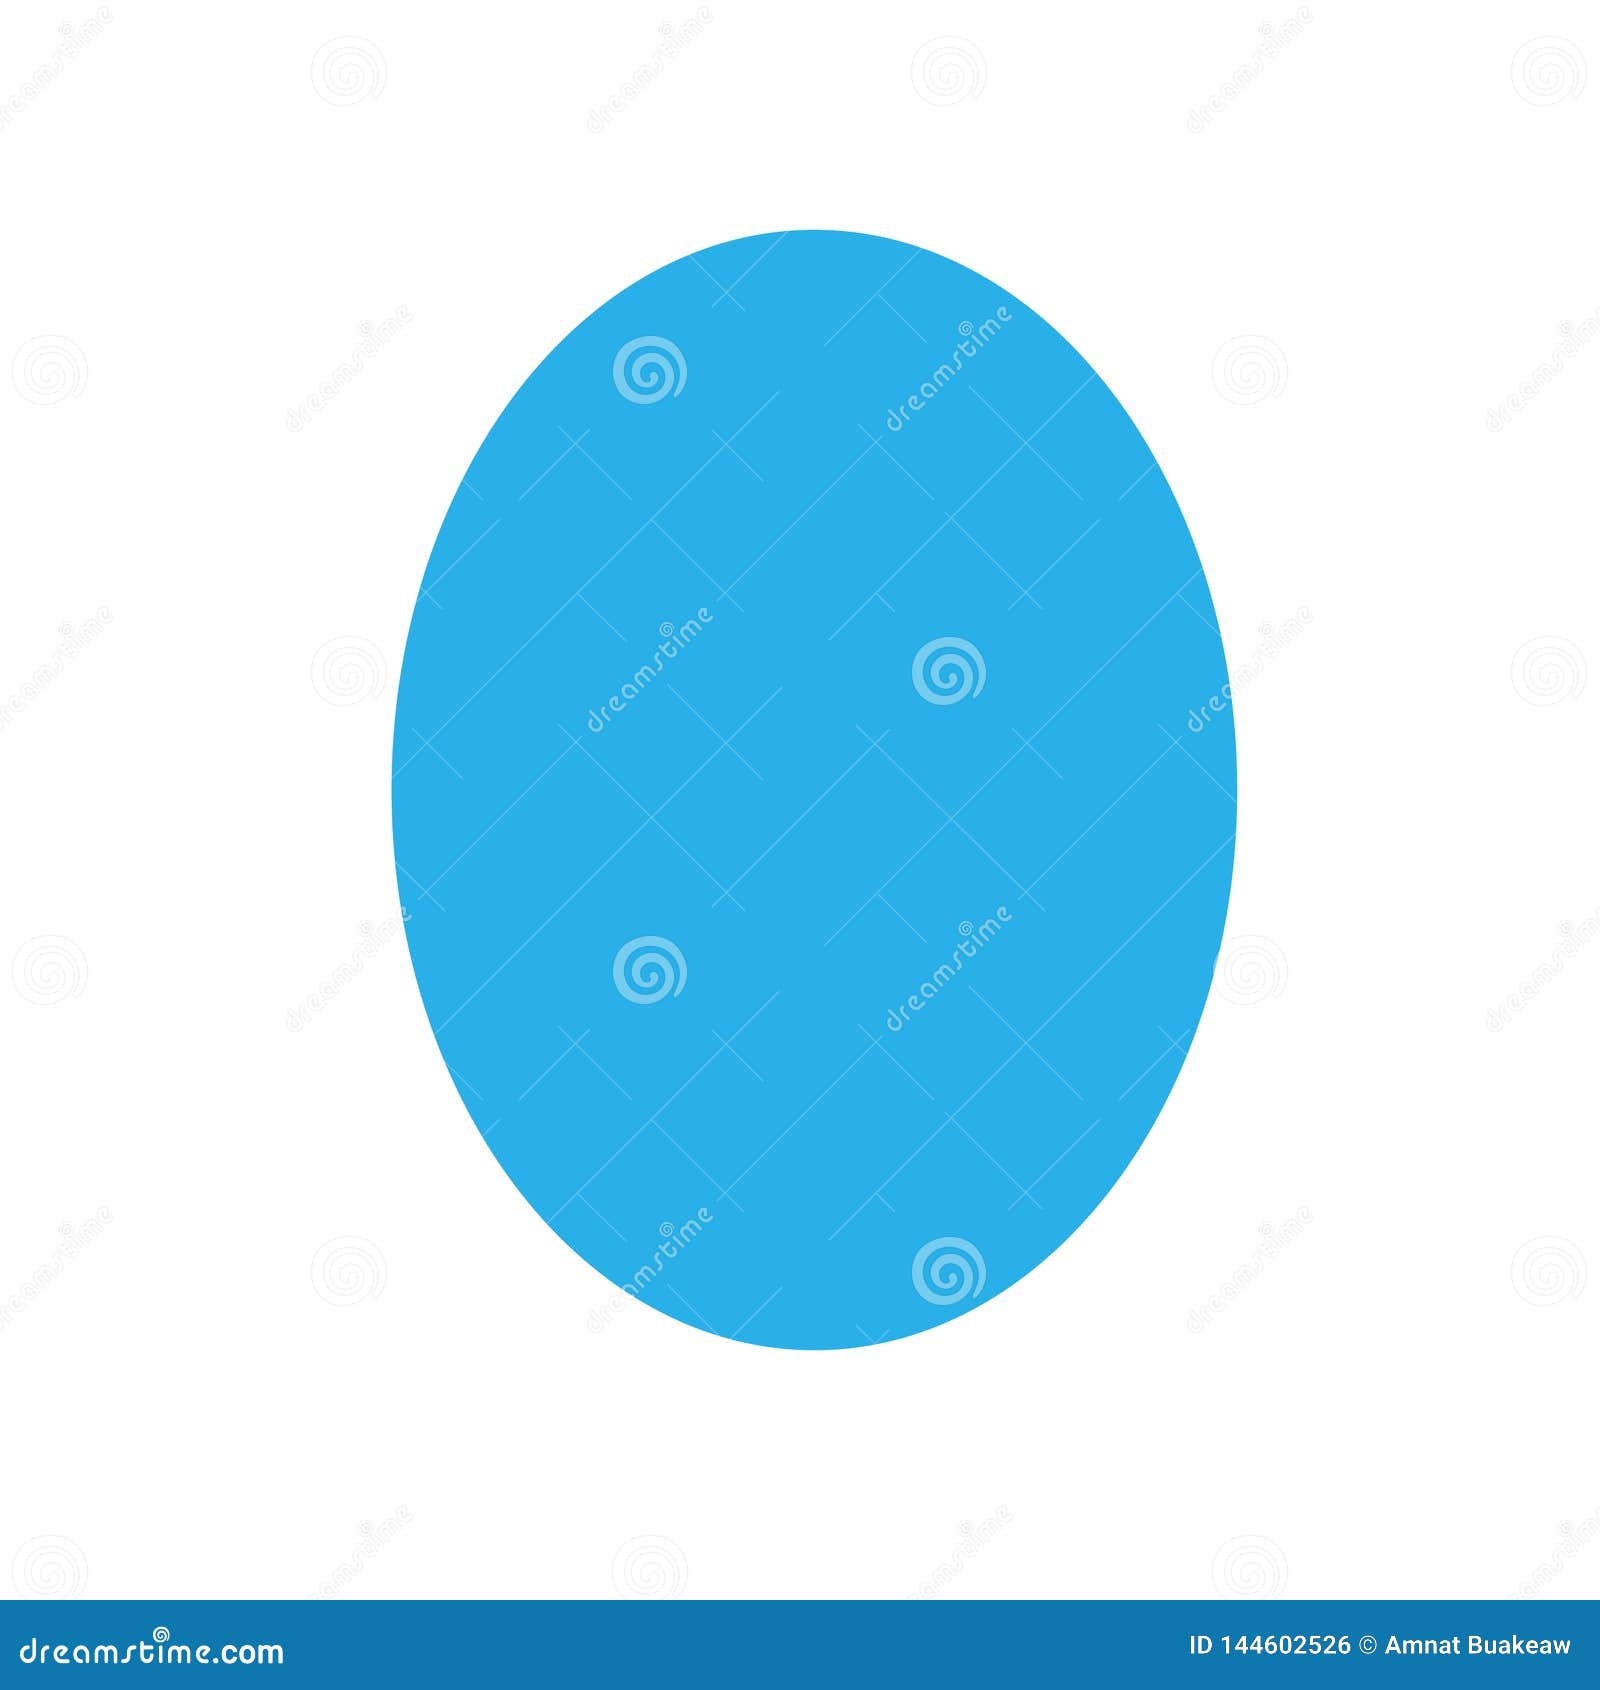 blue oval basic simple s  on white background, geometric oval icon, 2d   oval, clip art geometric oval